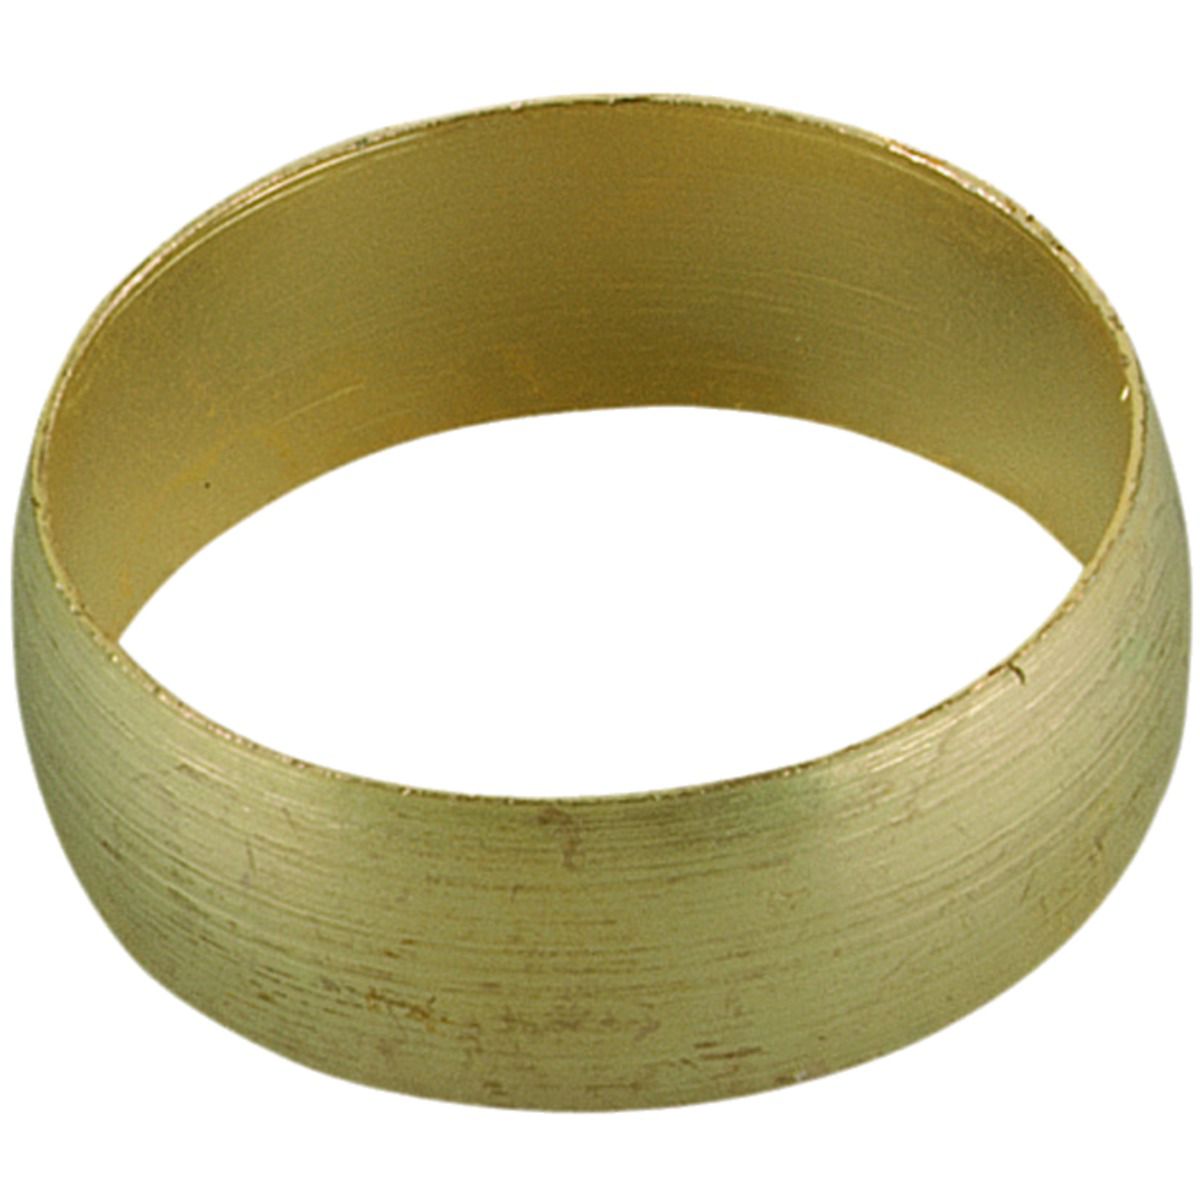 Image of Primaflow Brass Microbore Compression Olive Ring - 8mm Pack Of 5